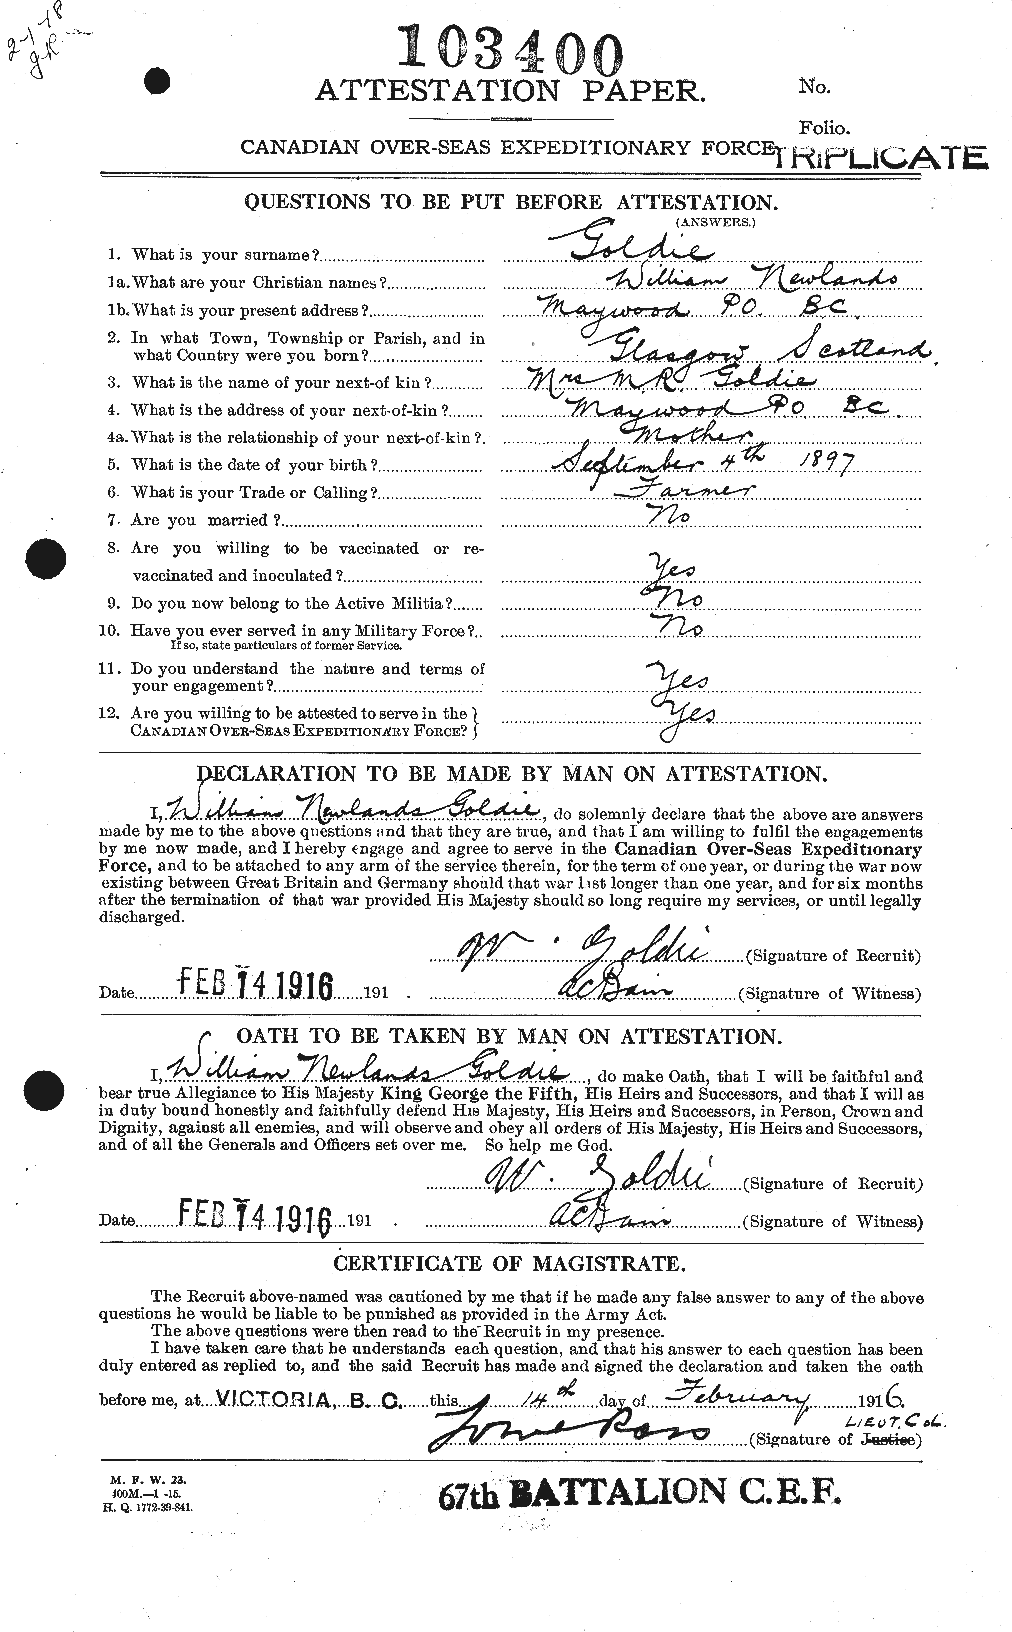 Personnel Records of the First World War - CEF 353957a